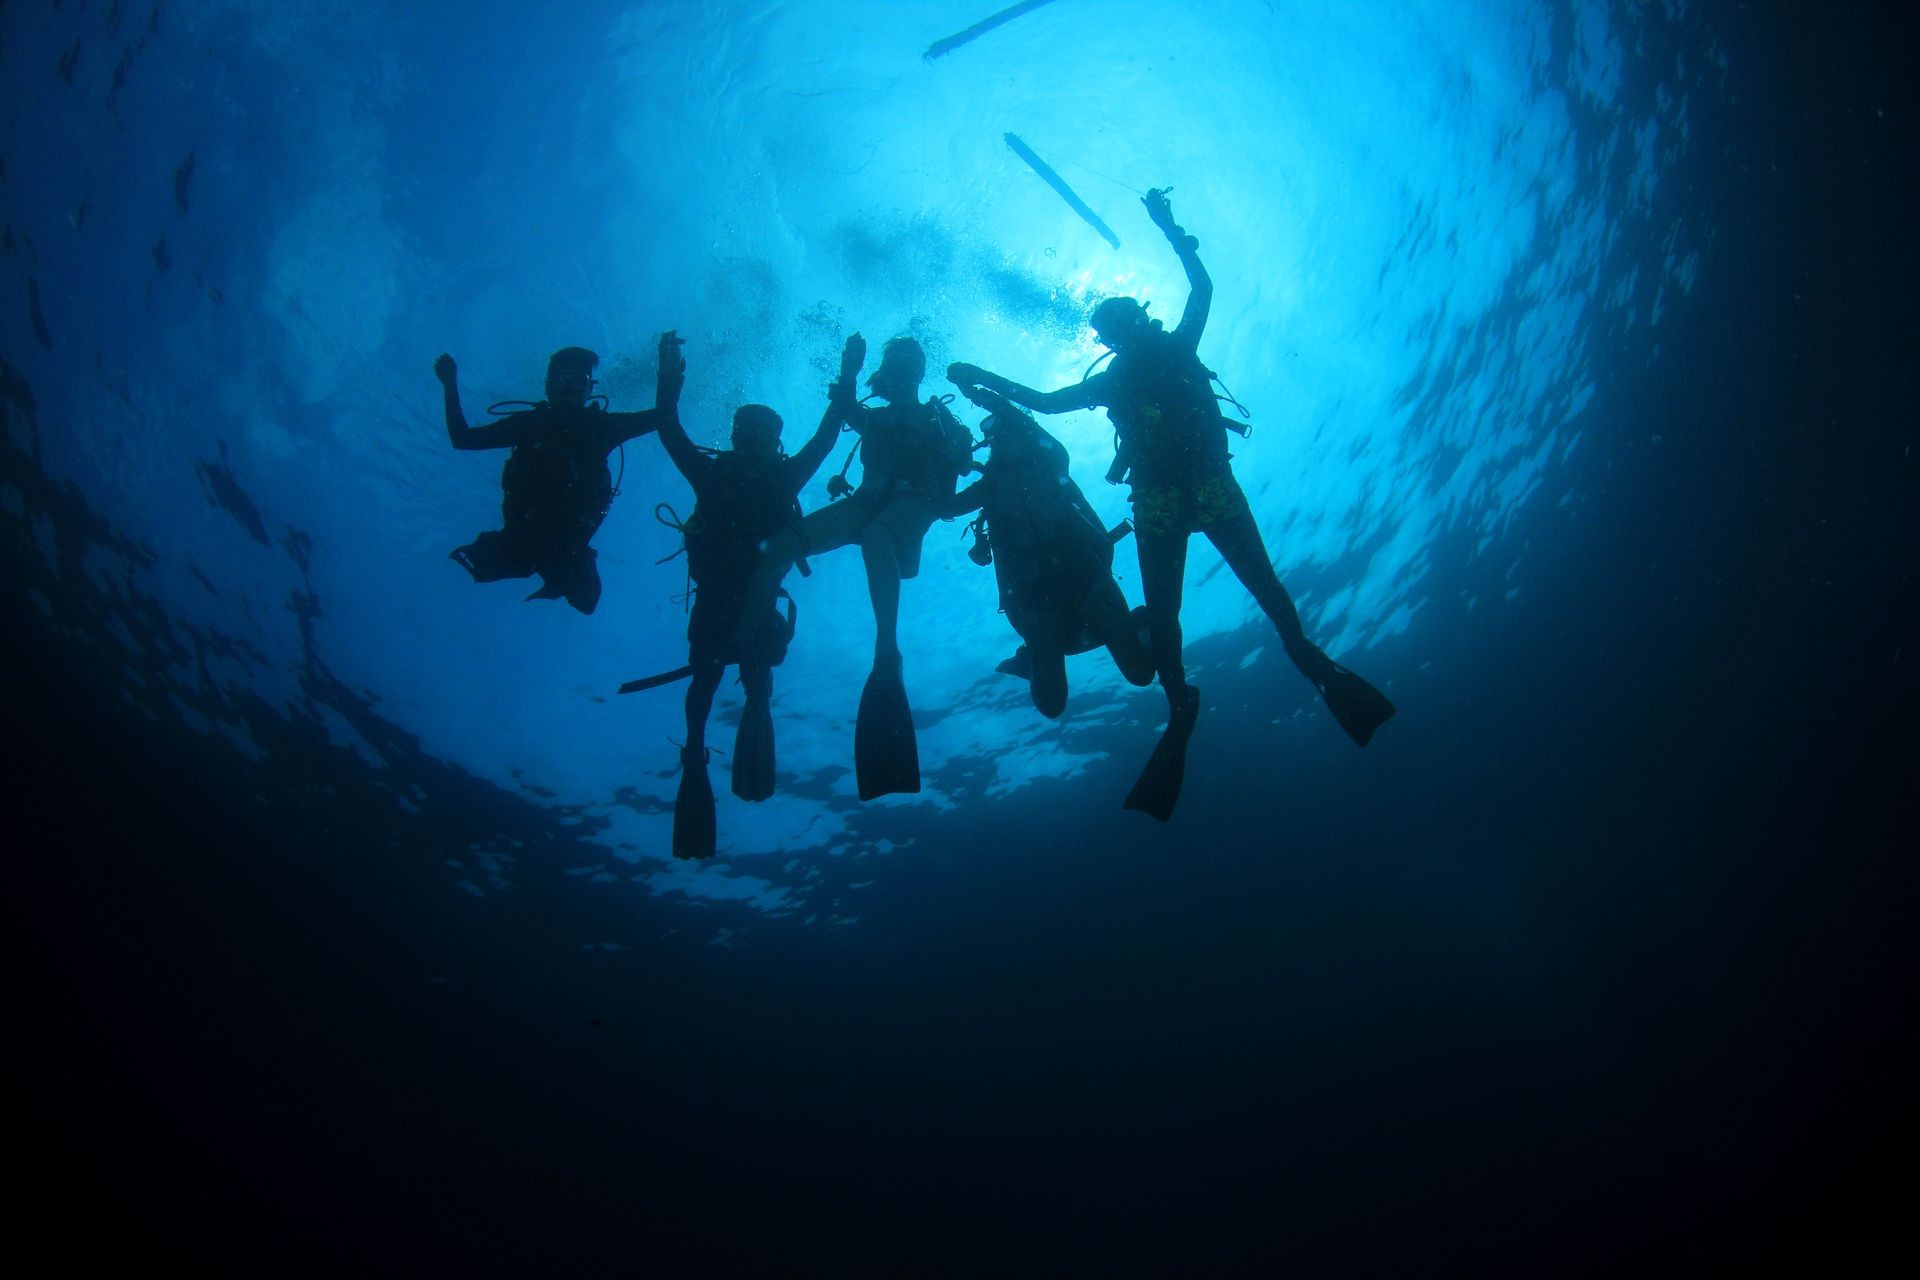 Scuba diving - group of divers silhouette underwater